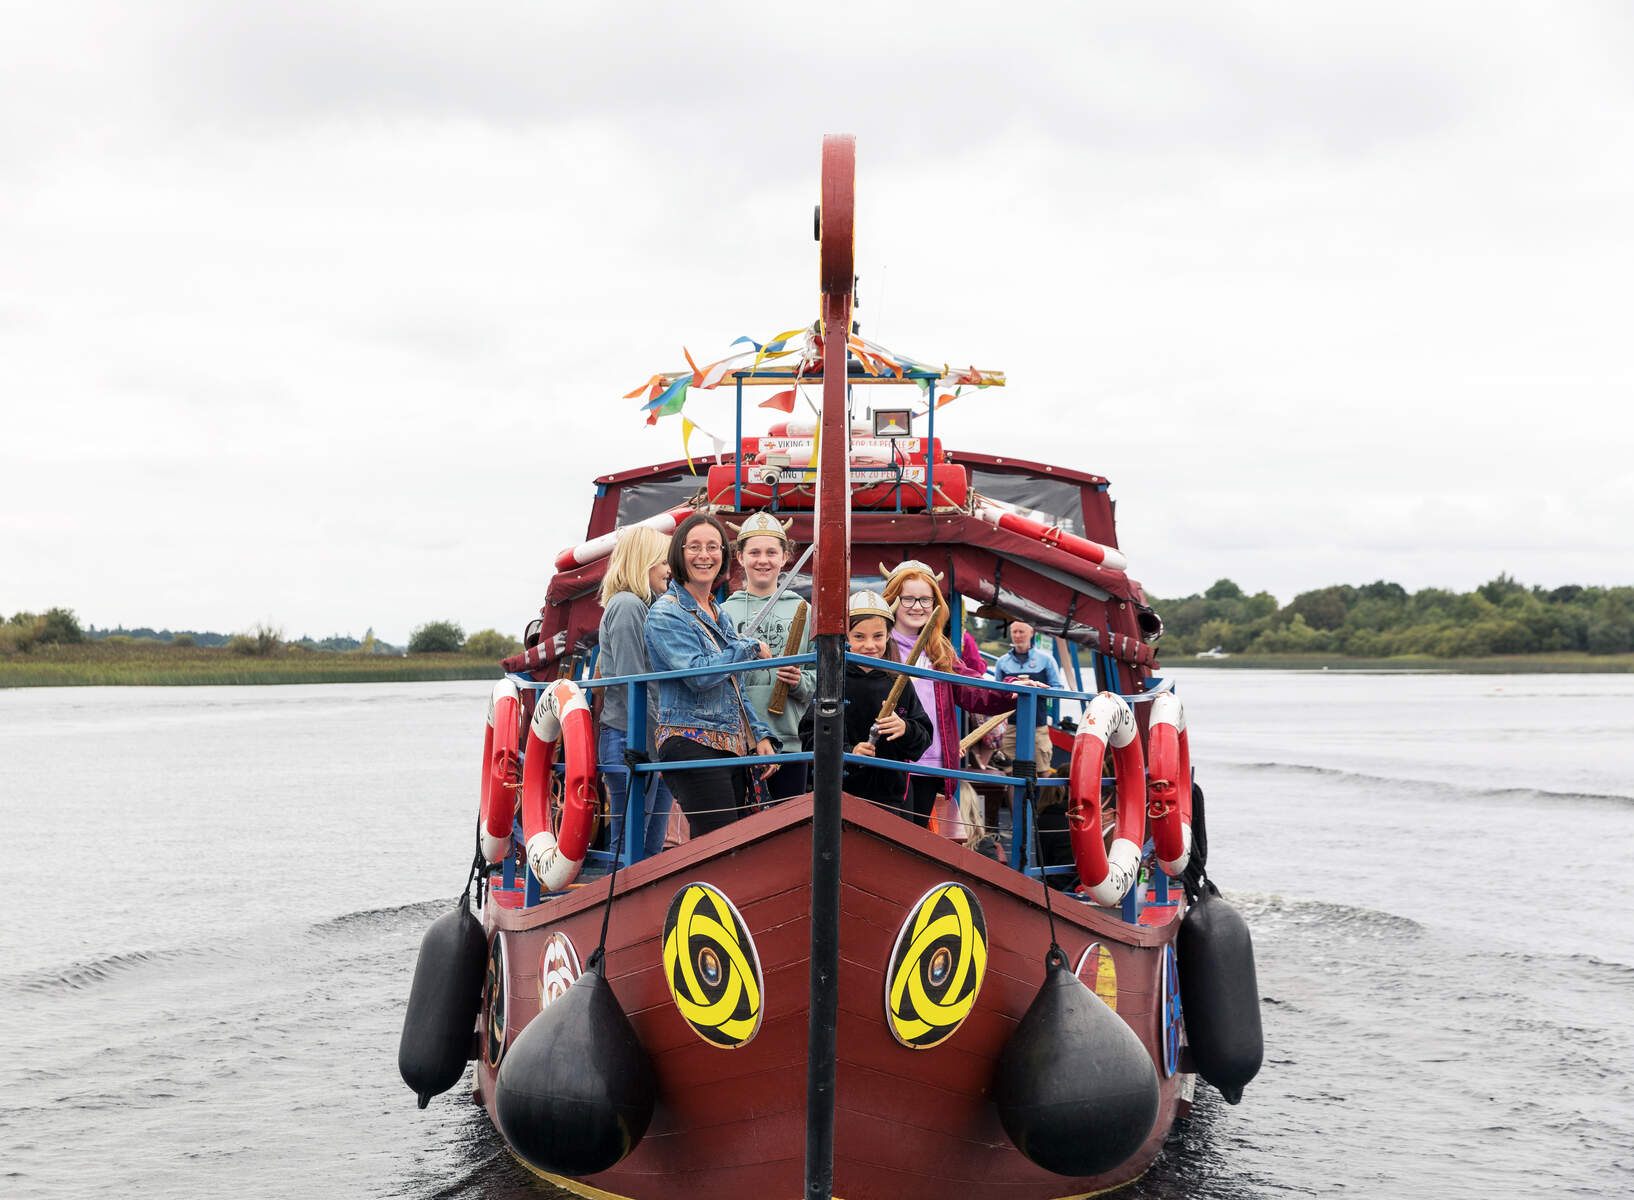 Image of Viking Ship Athlone with people standing at the bow of a small brown ship on the water.